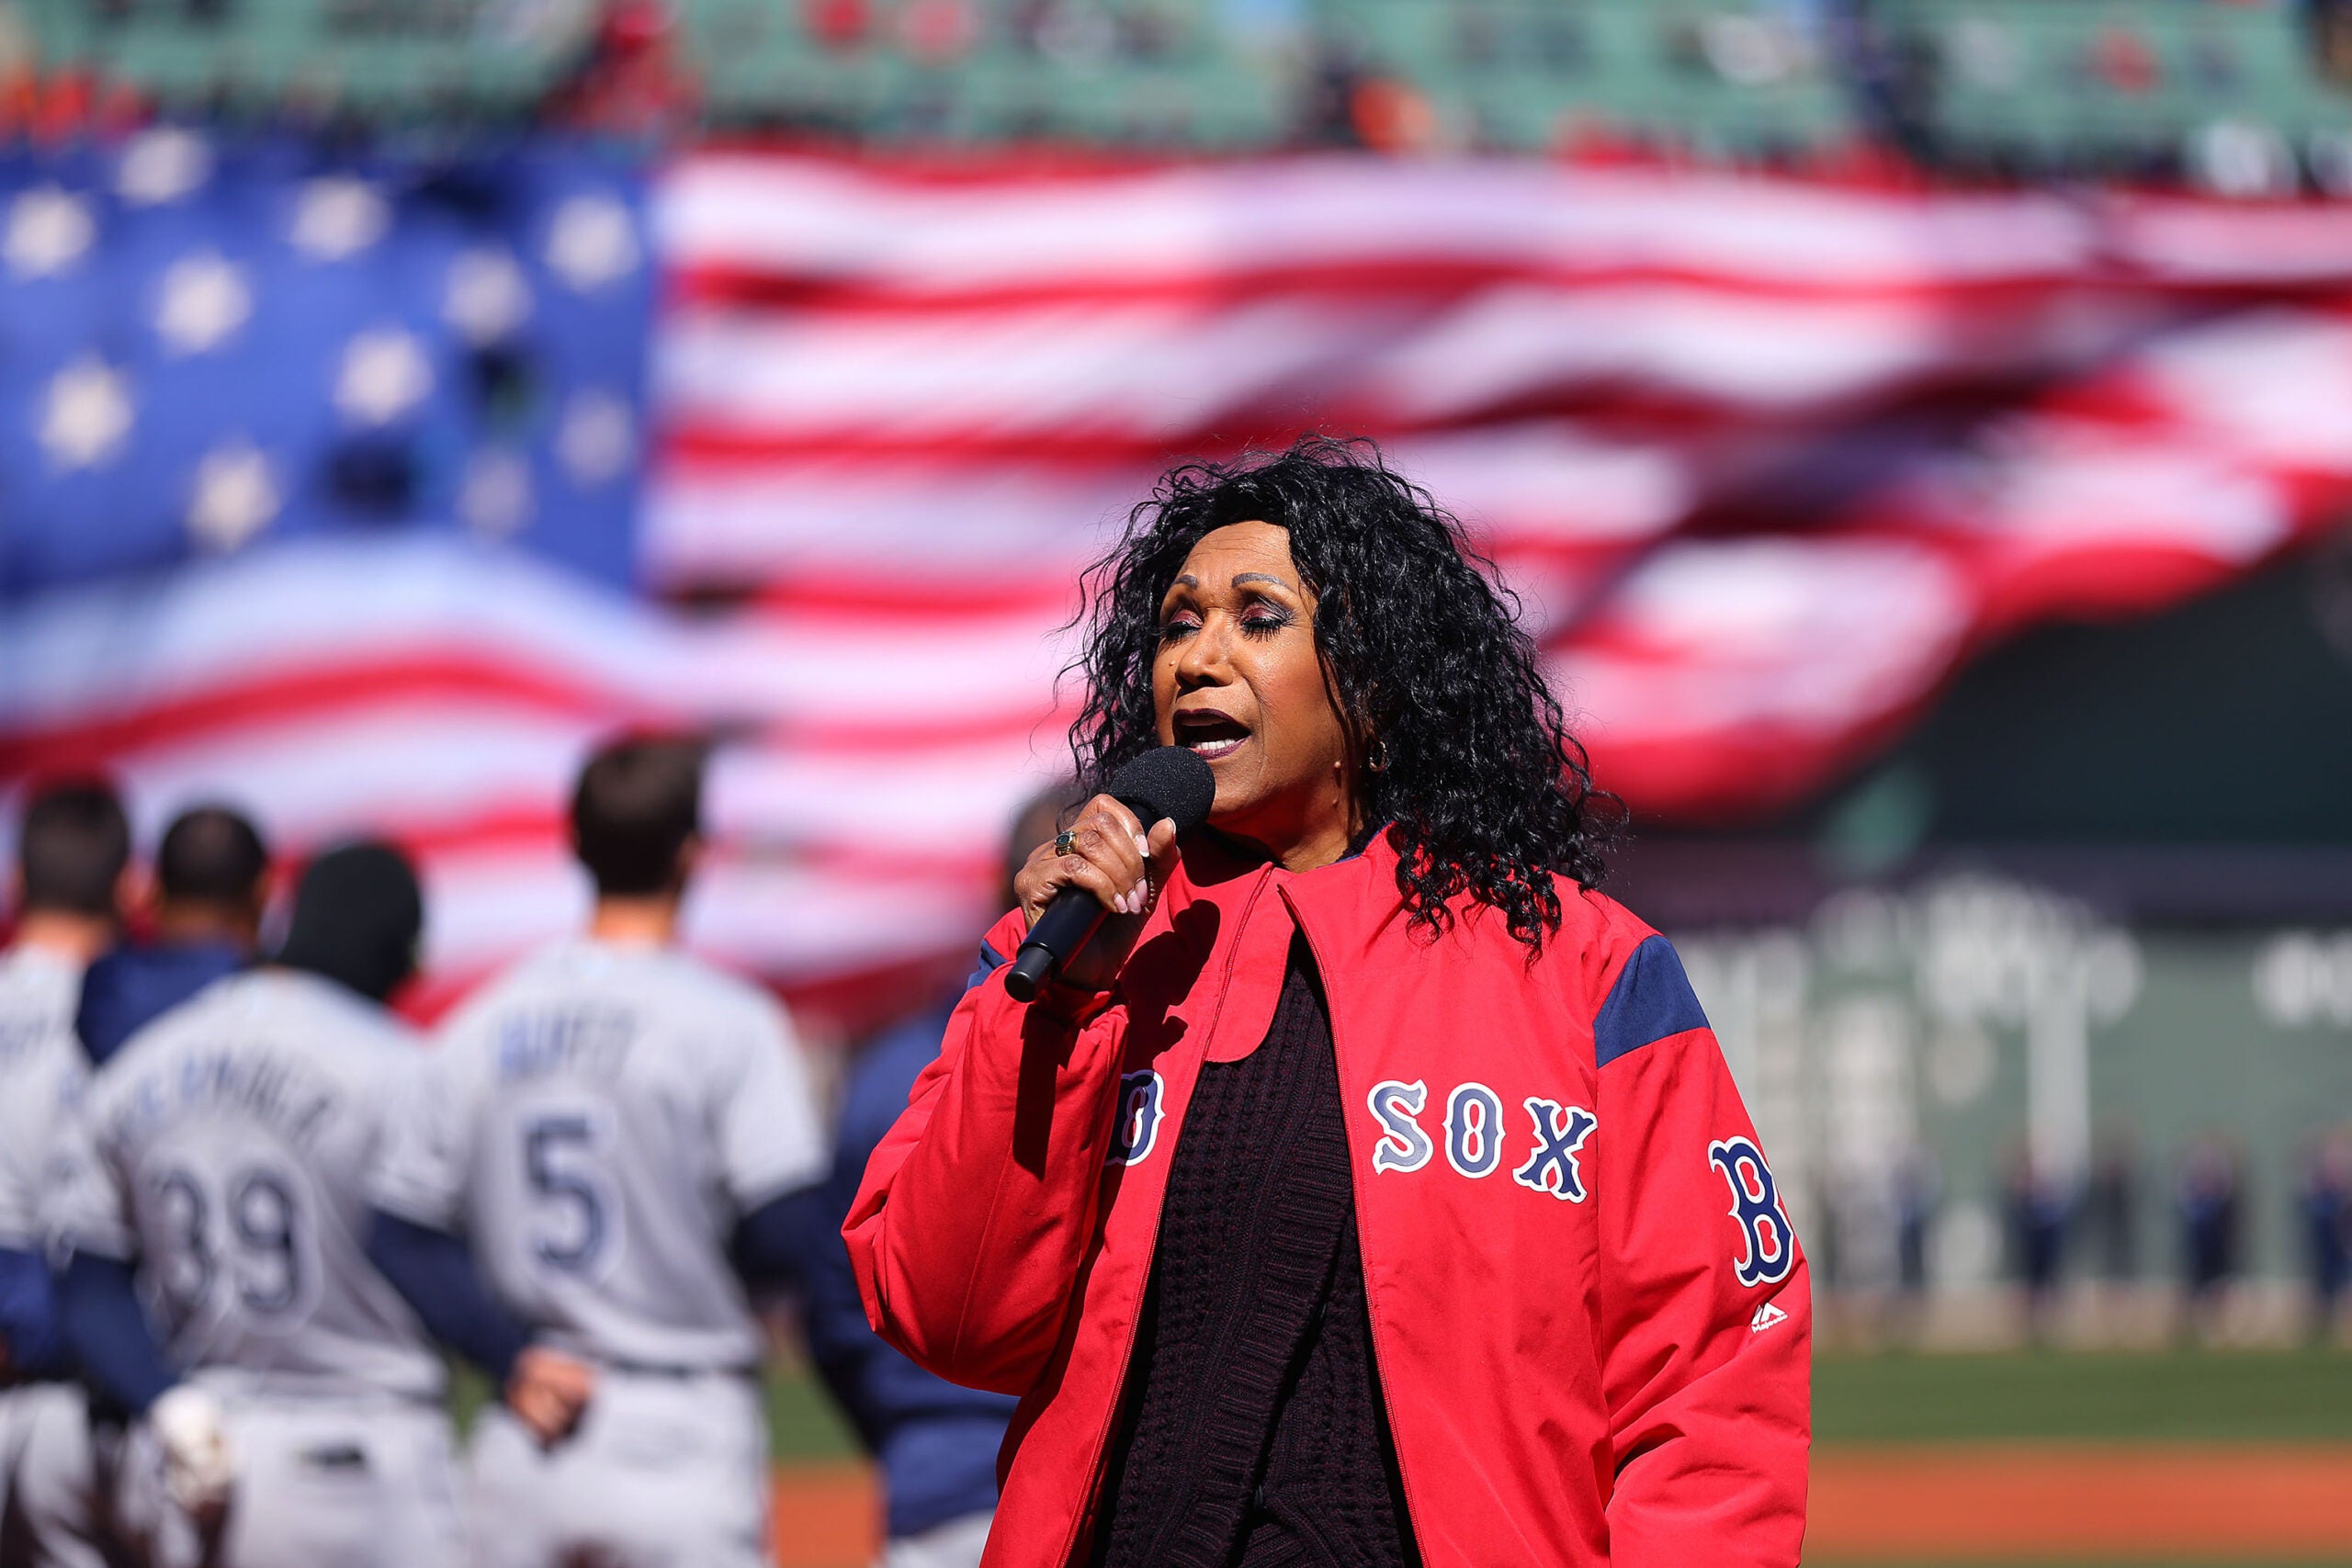 Ruth Pointer of the Pointer Sisters sings the National Anthem at the Red Sox home opener in 2018.  